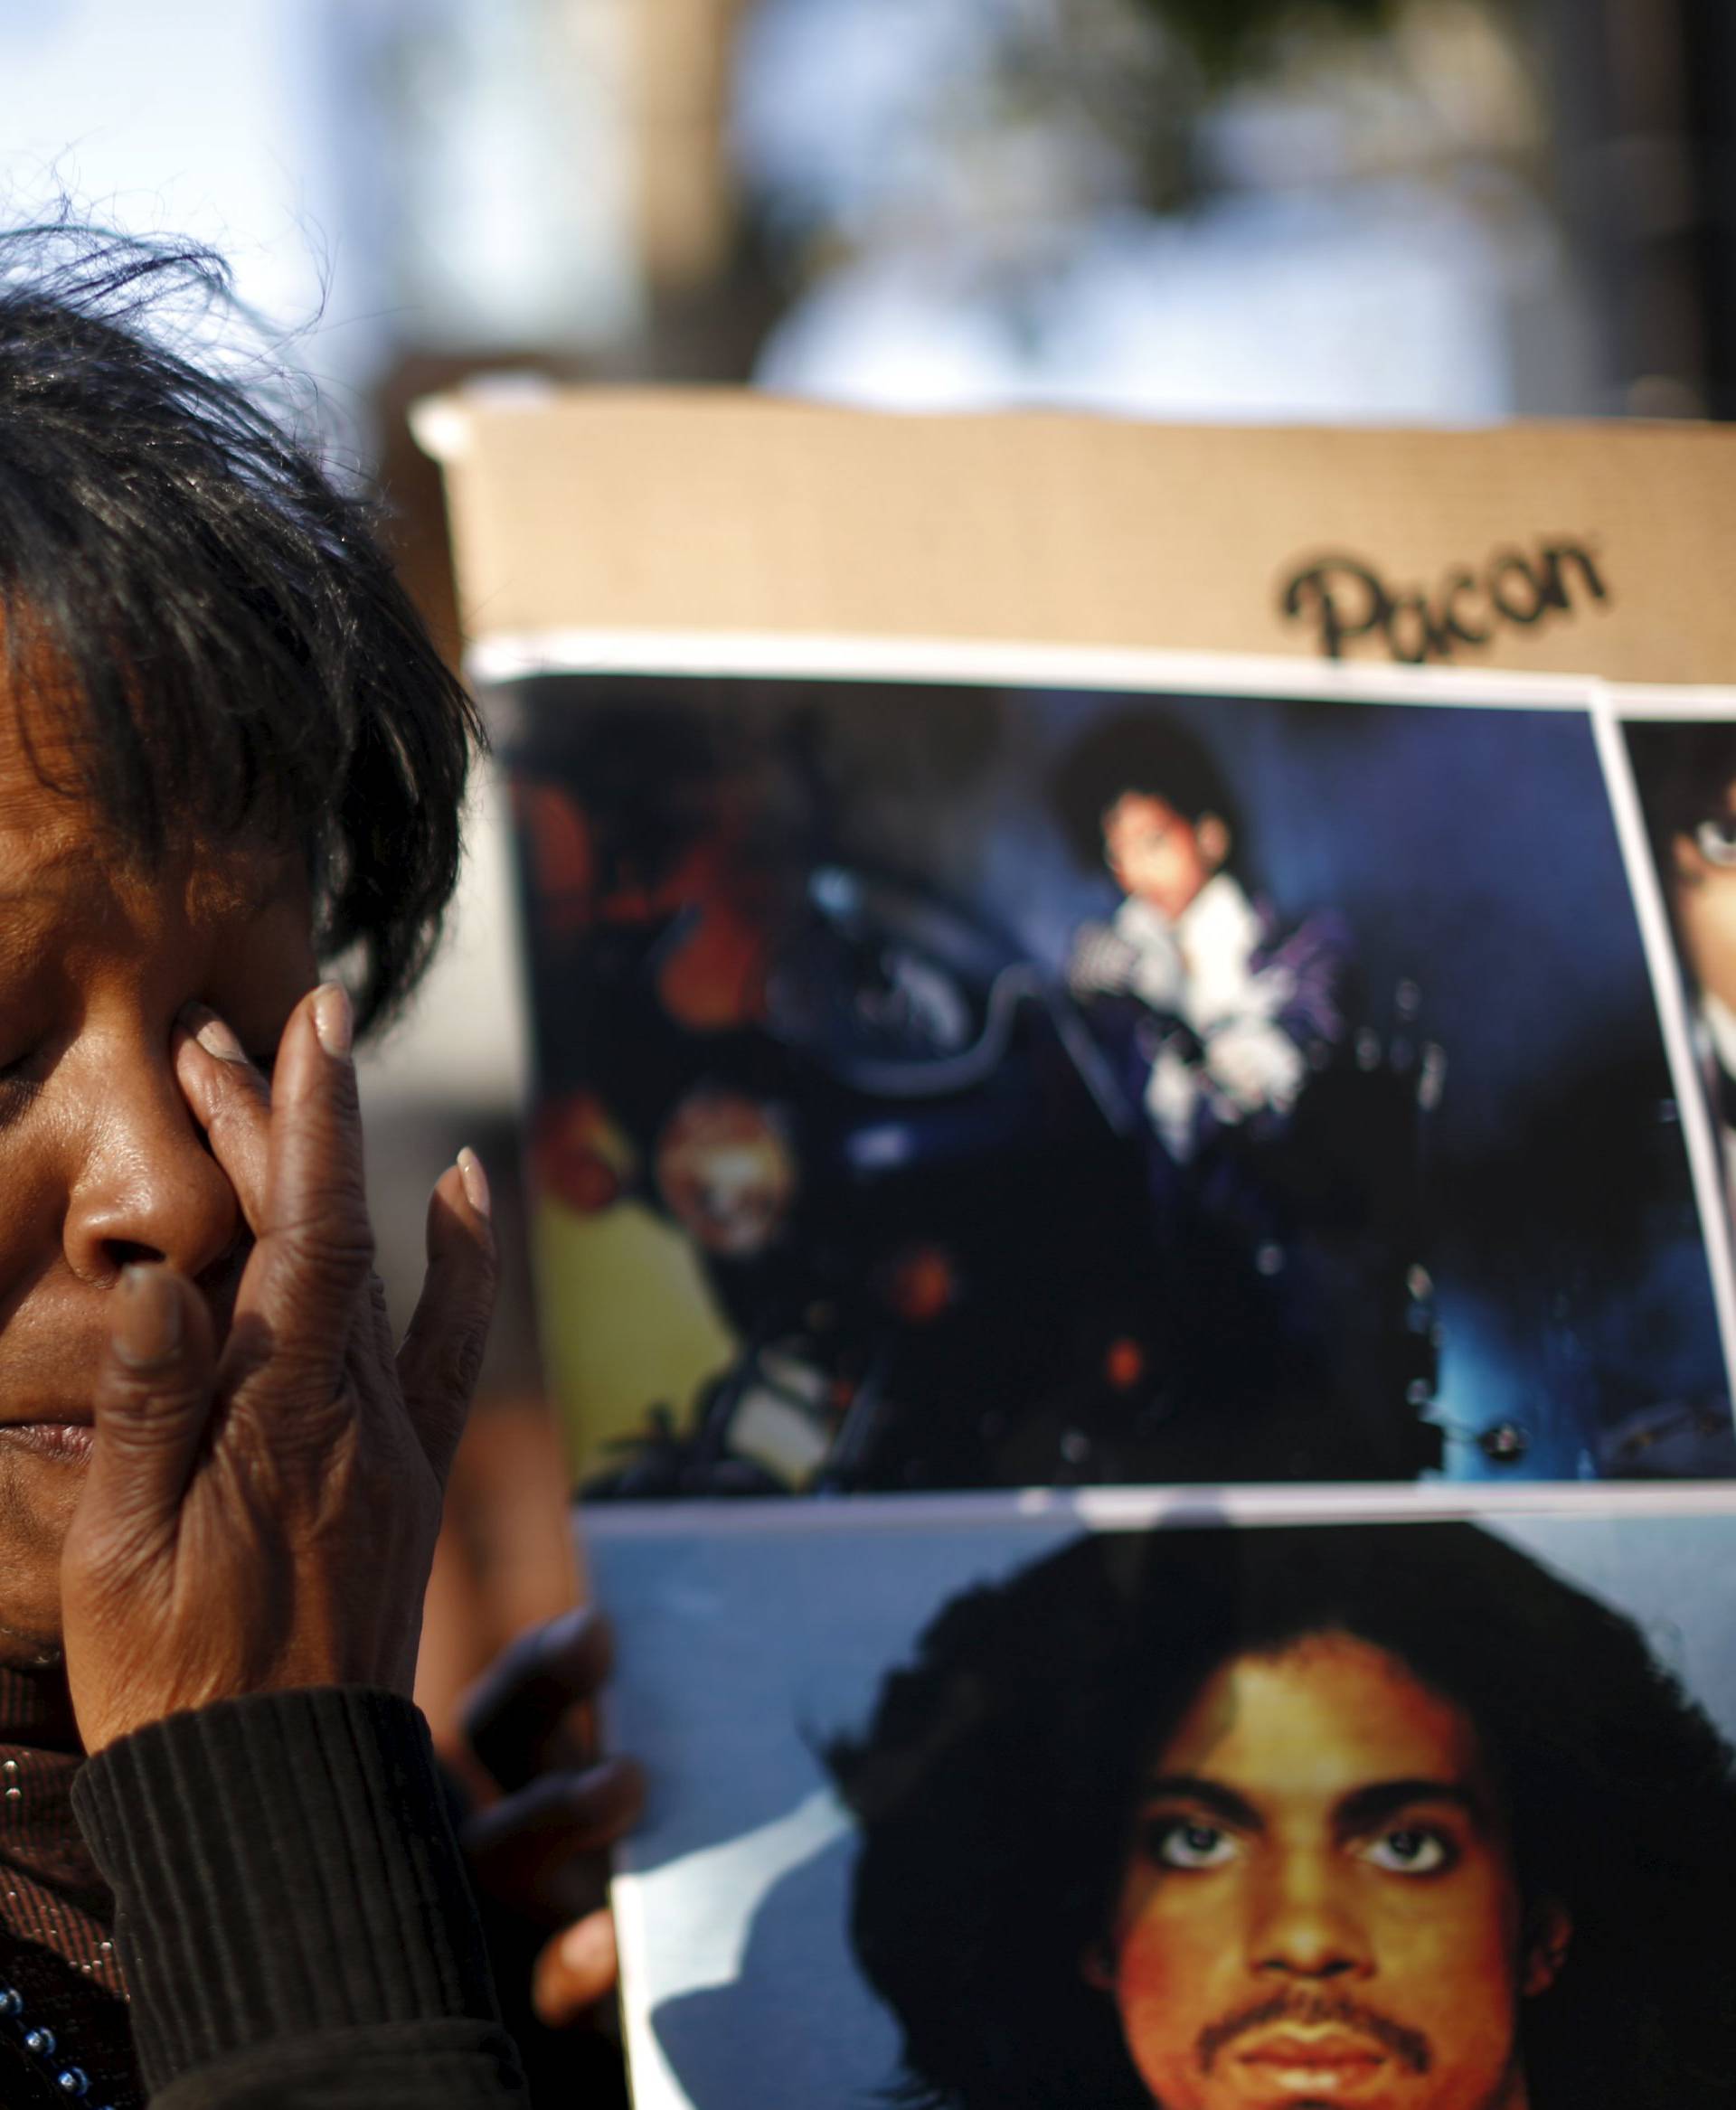 Lorraine Womble wipes her eye at a vigil to celebrate the life and music of deceased musician Prince in Los Angeles